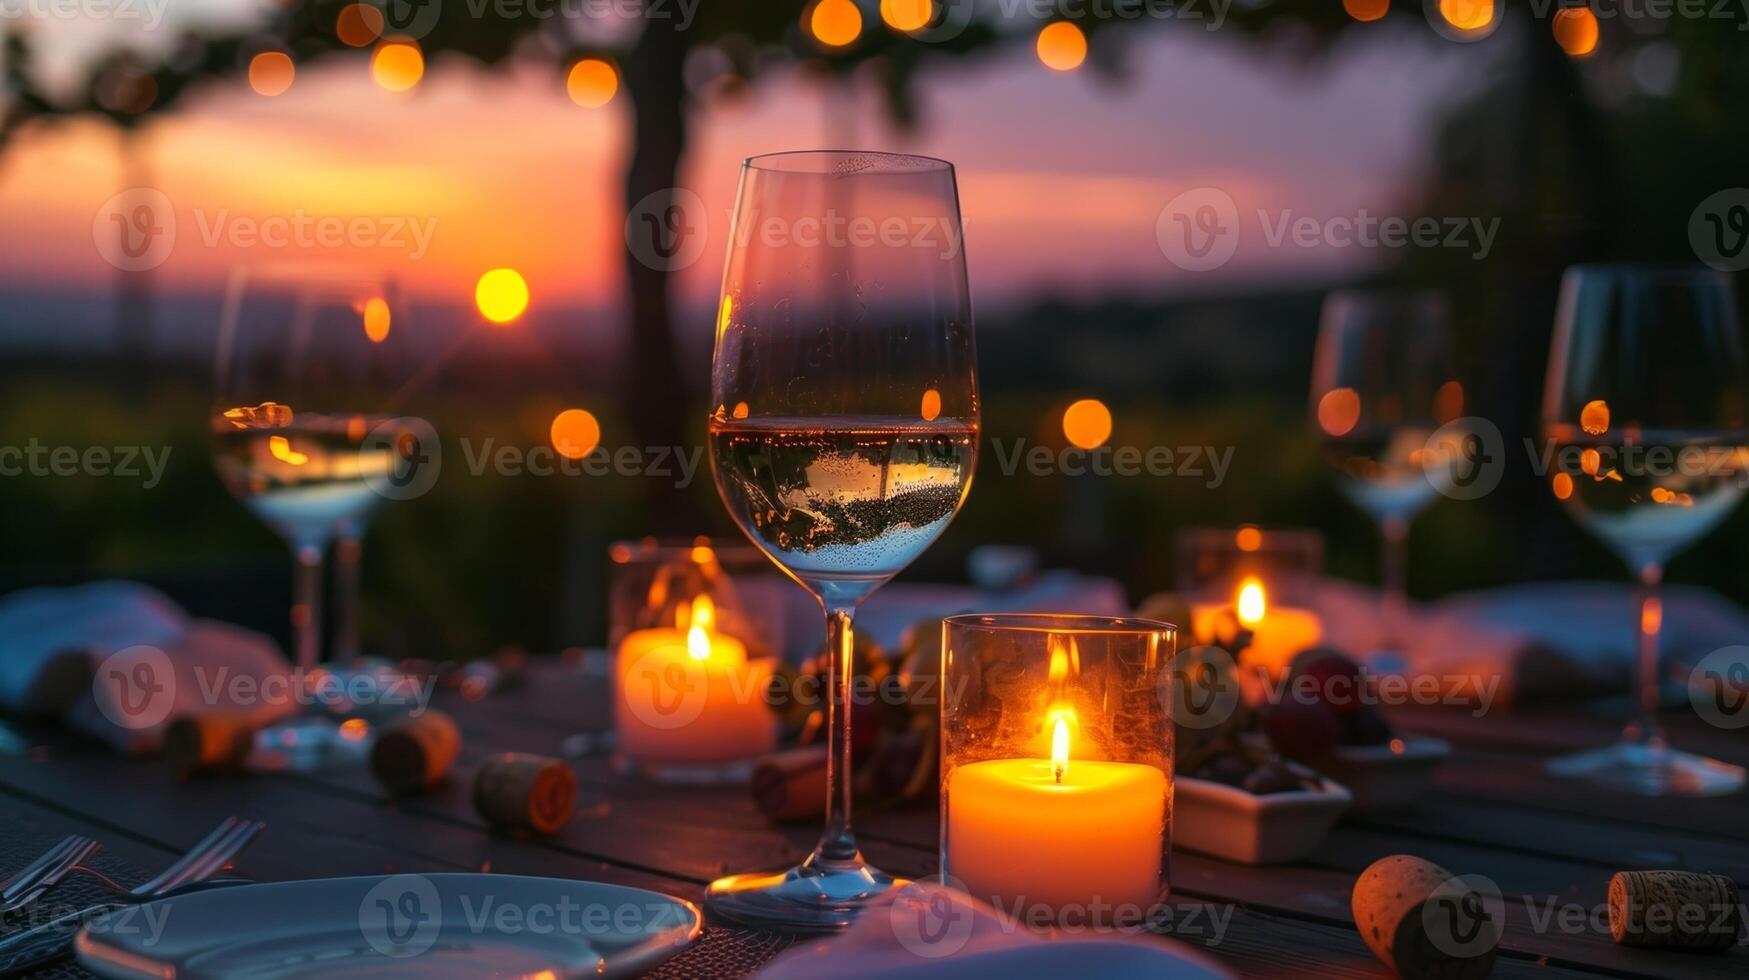 As the sun sets the candles become the main source of light adding a touch of magic to the evenings wine tasting experience. 2d flat cartoon photo